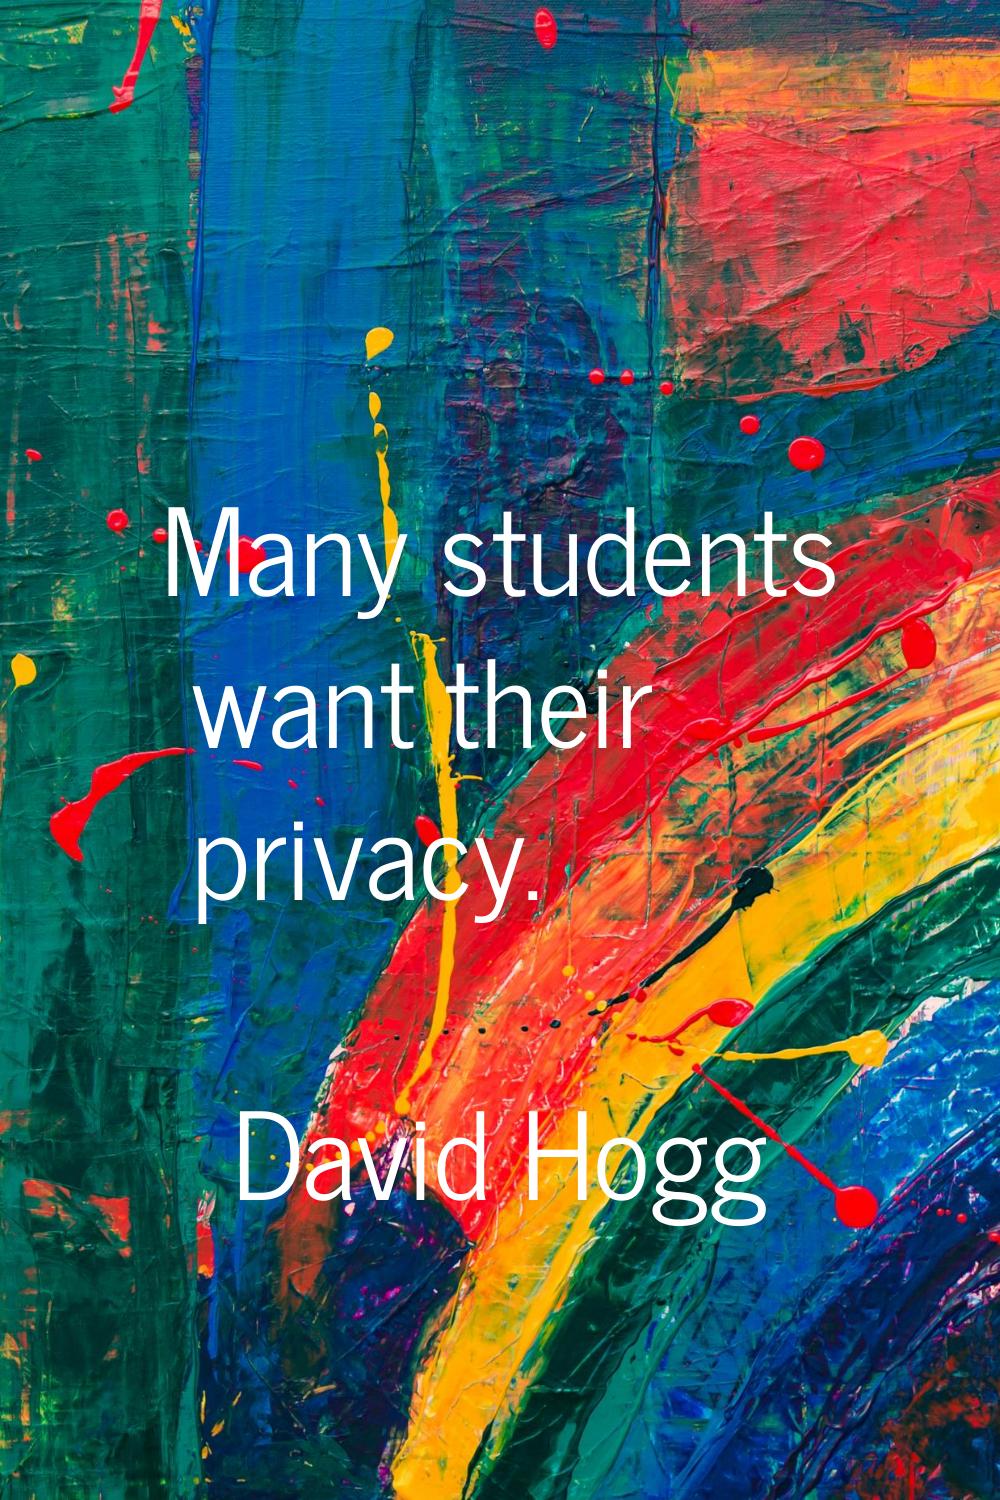 Many students want their privacy.